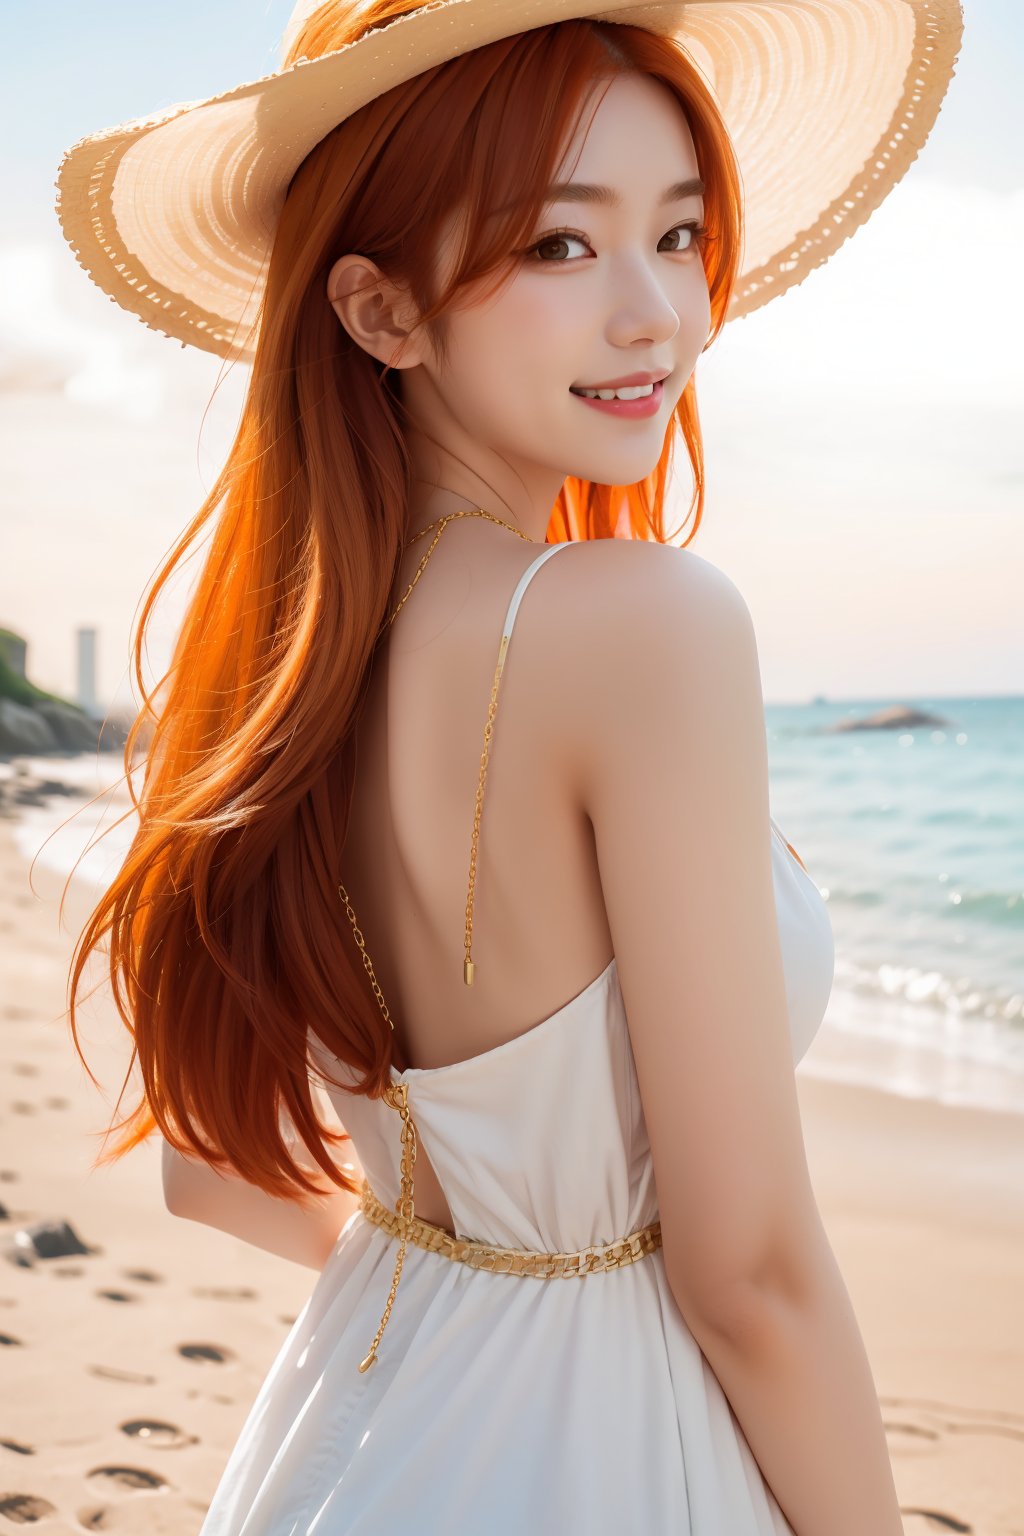 beautiful, 1girl,
(Orange hair:1.2),
long hair, smile, white sundress, sunhat, Golden chain necklace with heart pendant, hk_girl, beach background, turn around, looking at viewer, back